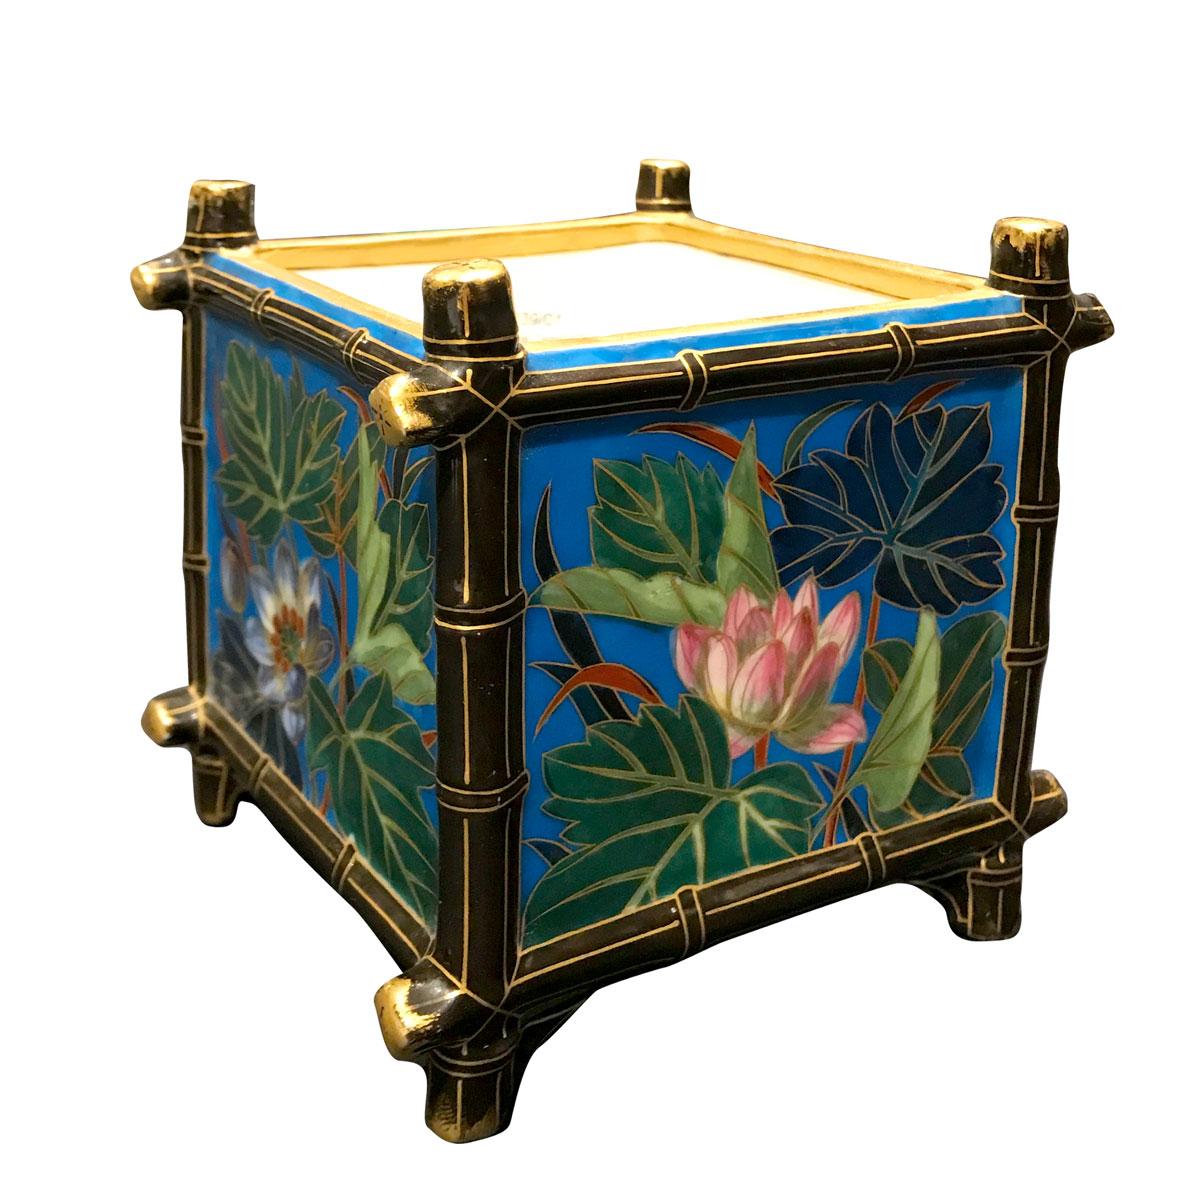 Exquisite square planter in the Japonisme style. The whole planter is structured on bamboo-style edges.
Each face is decorated with flowers and leaves on a vivid blue background/ Each side has a different pattern and all the designs are framed by a